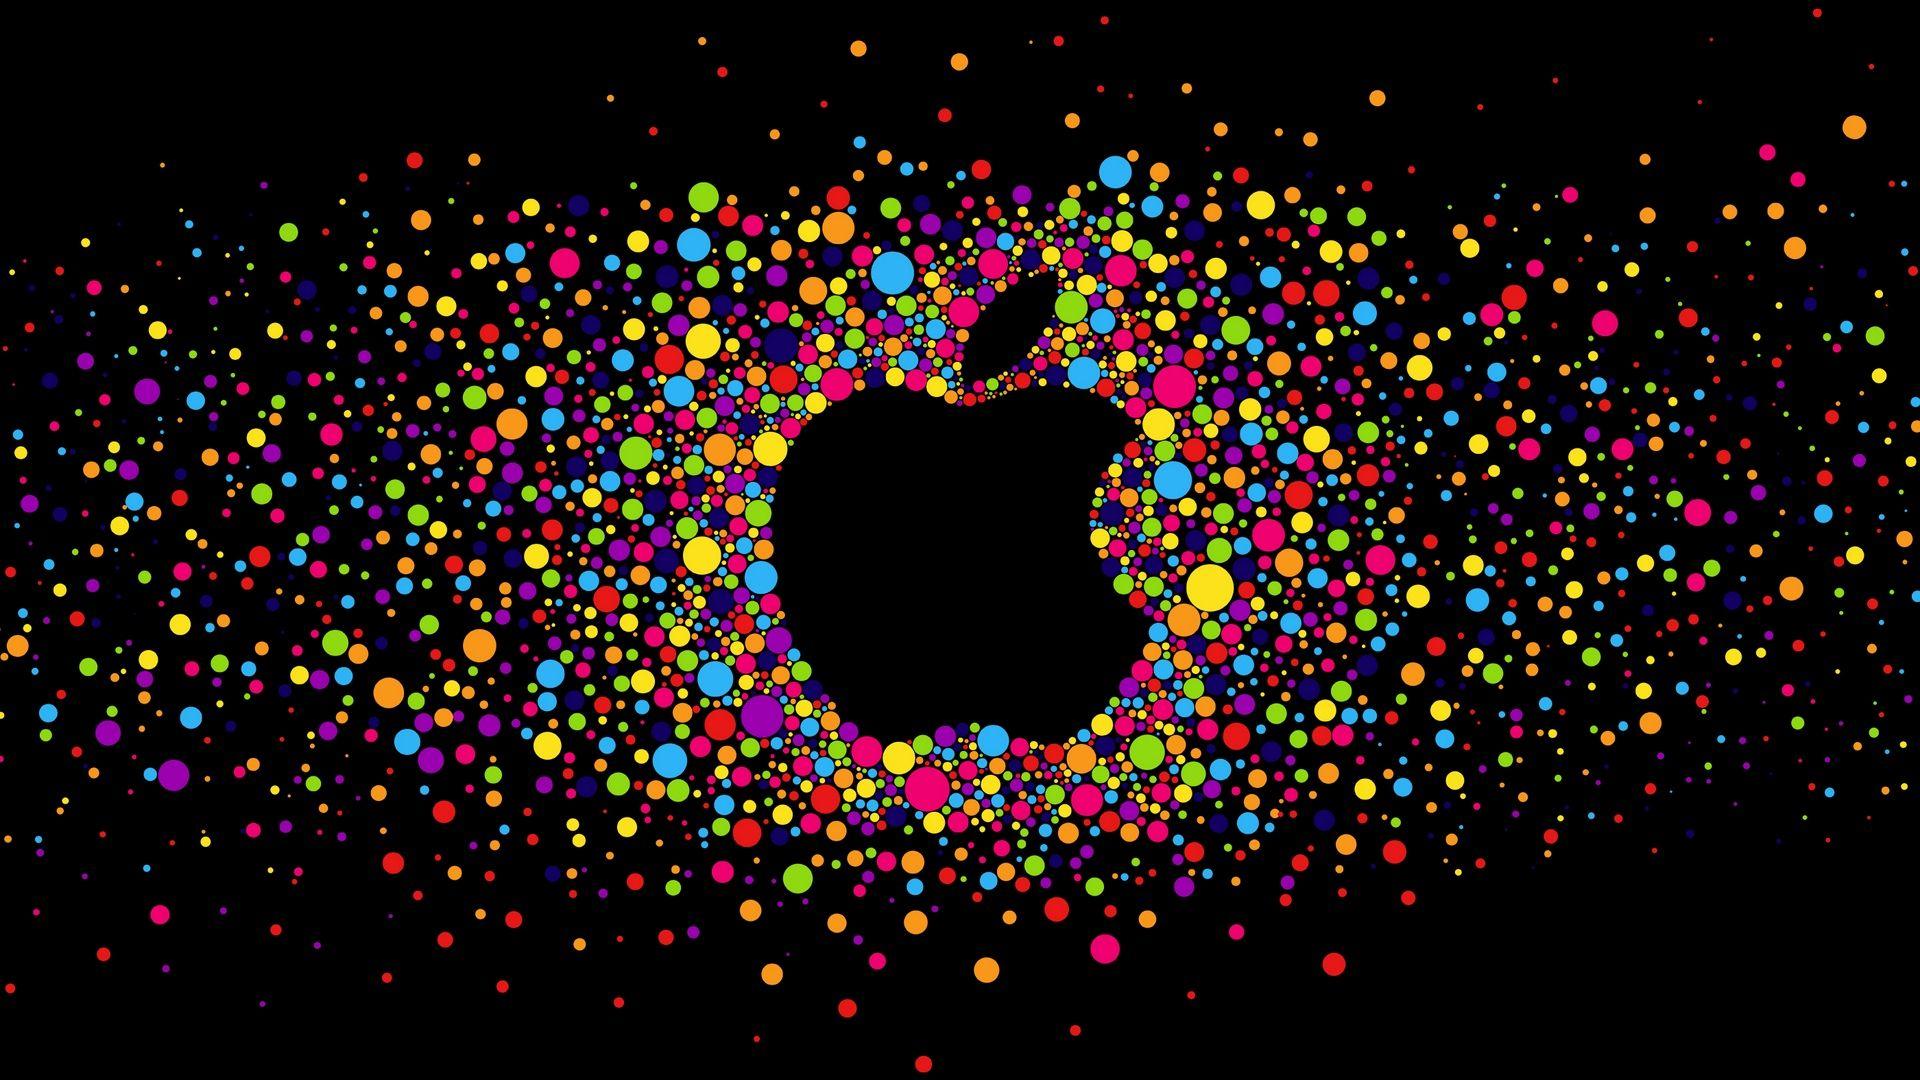 Colorful Circles with Black Background and Apple Logo Wallpaper